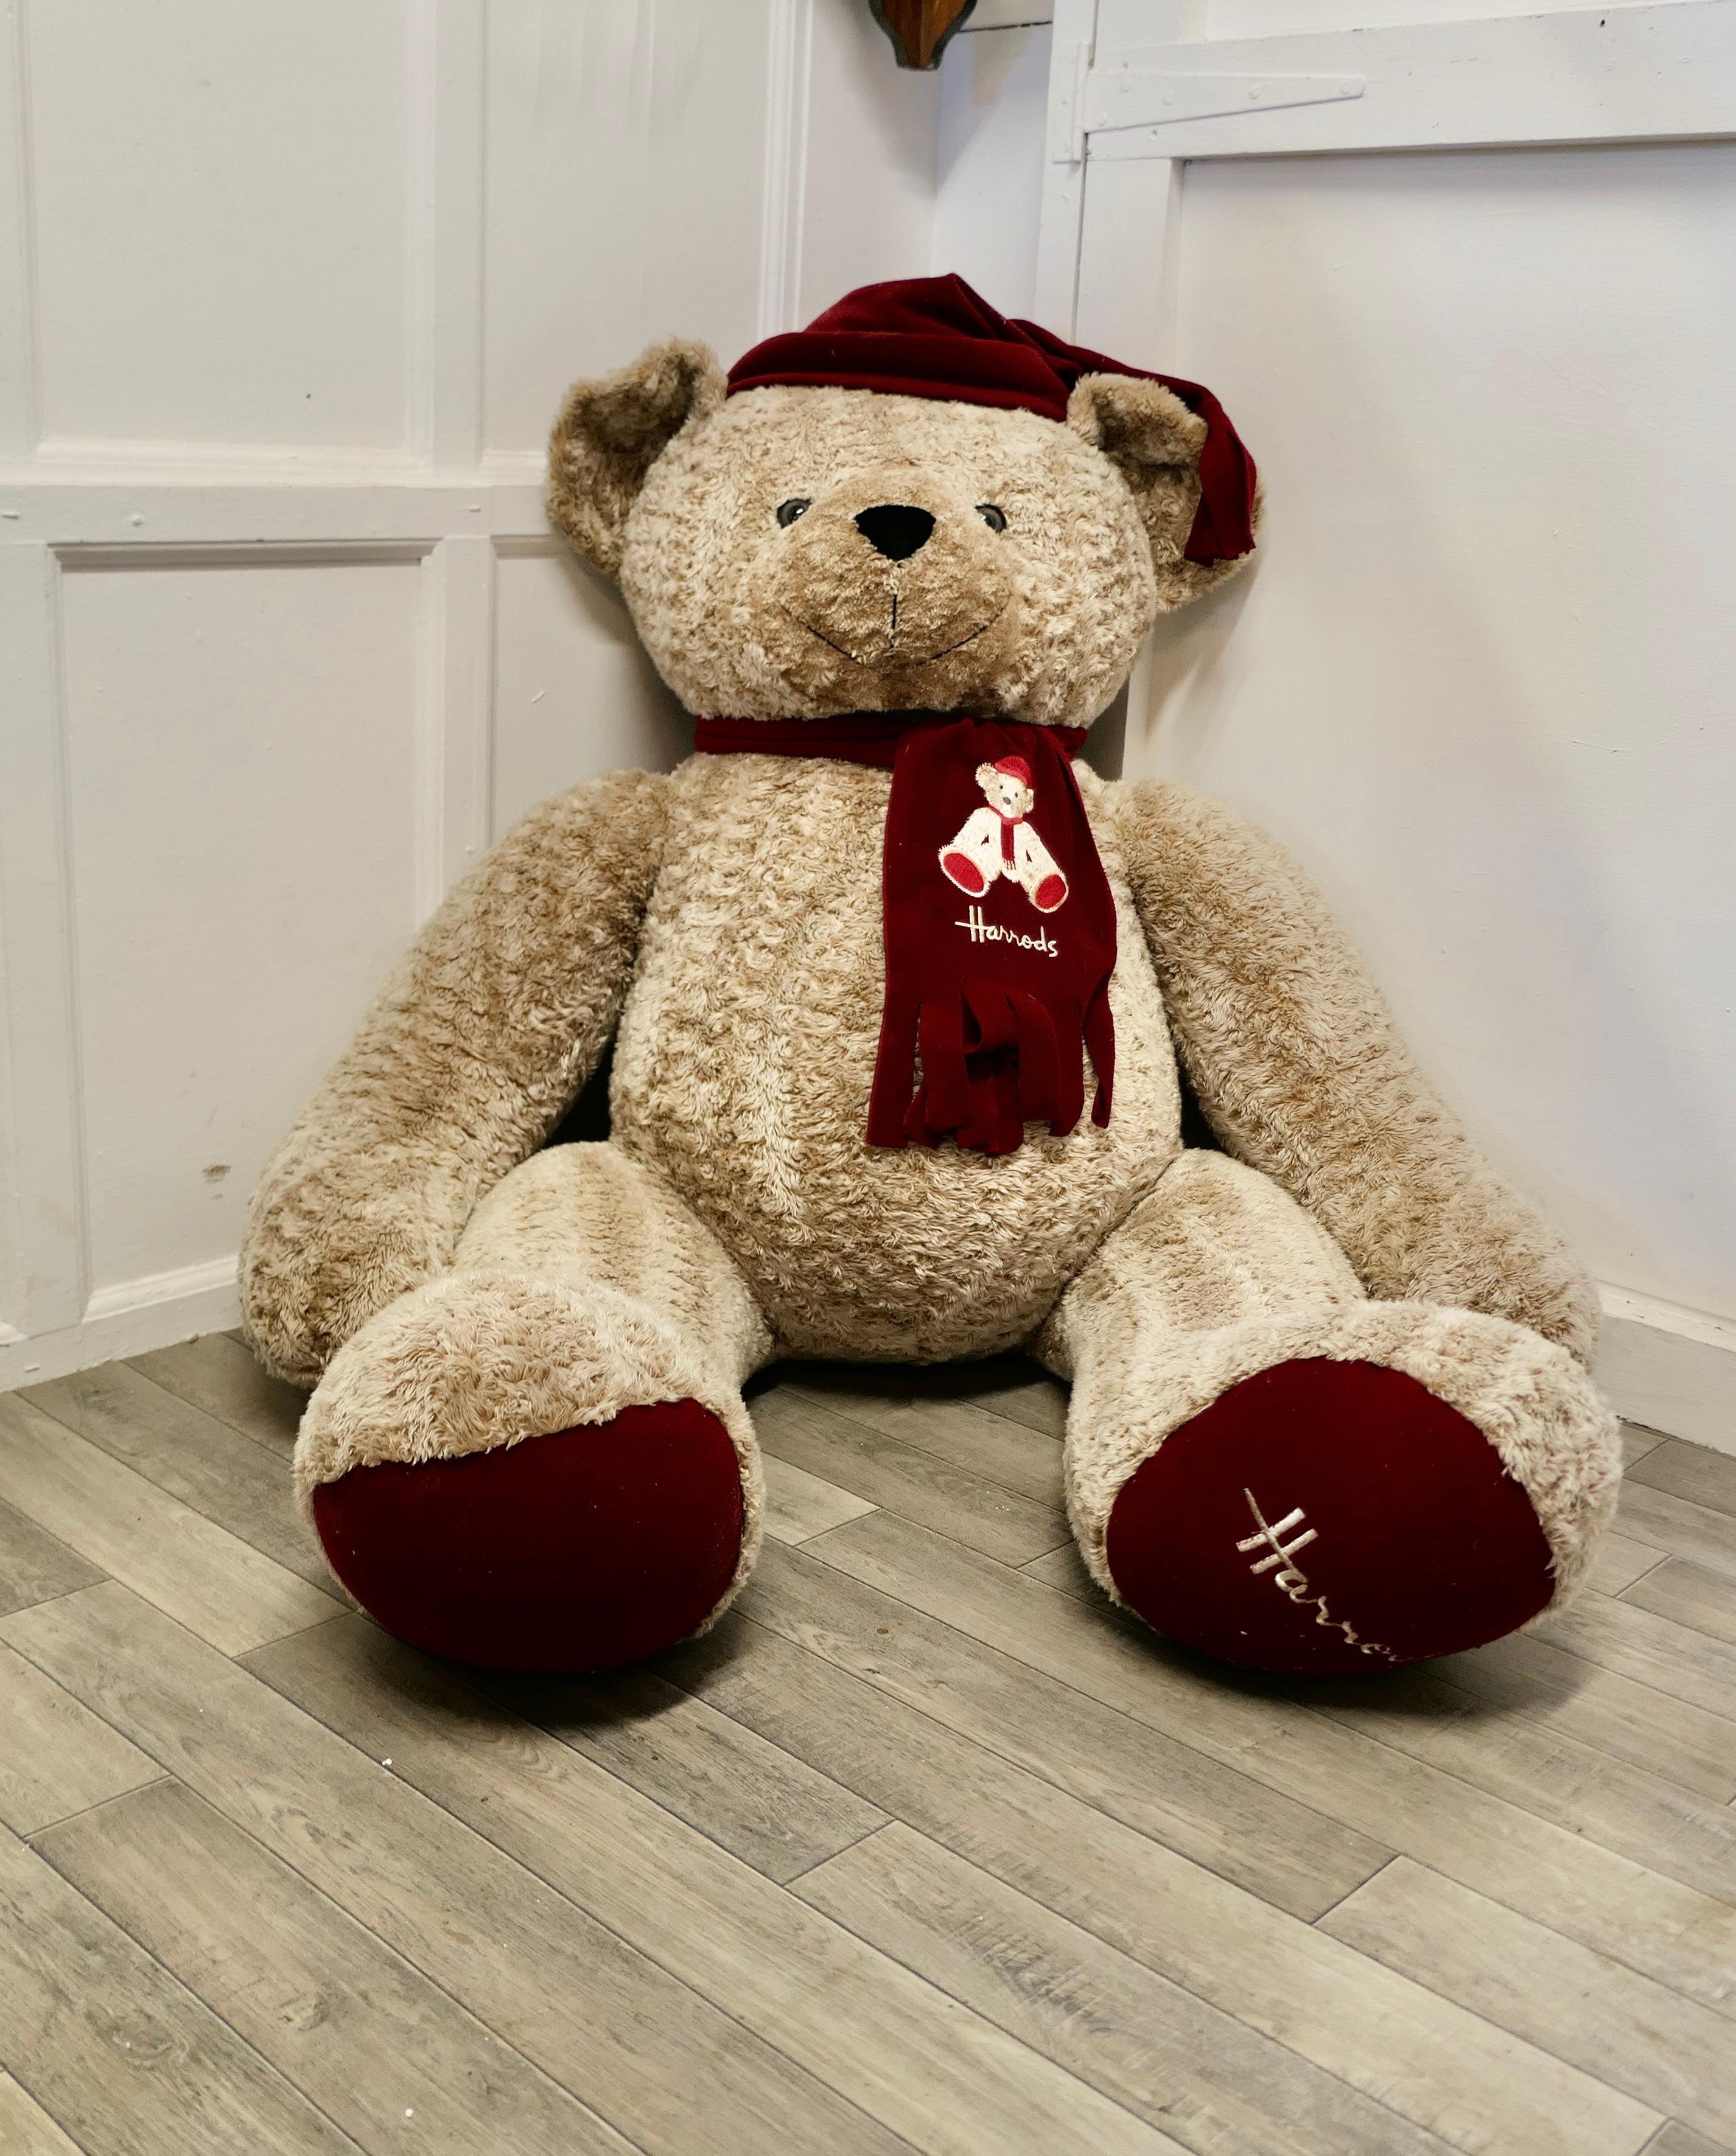 5ft tall giant Harrods shop display teddy bear.

This is a very rare piece, he is one of a very few, probably only 5 that were made for Harrods shop display, he is known as James, he is nearly 21 Years old this year and all ready to party all over